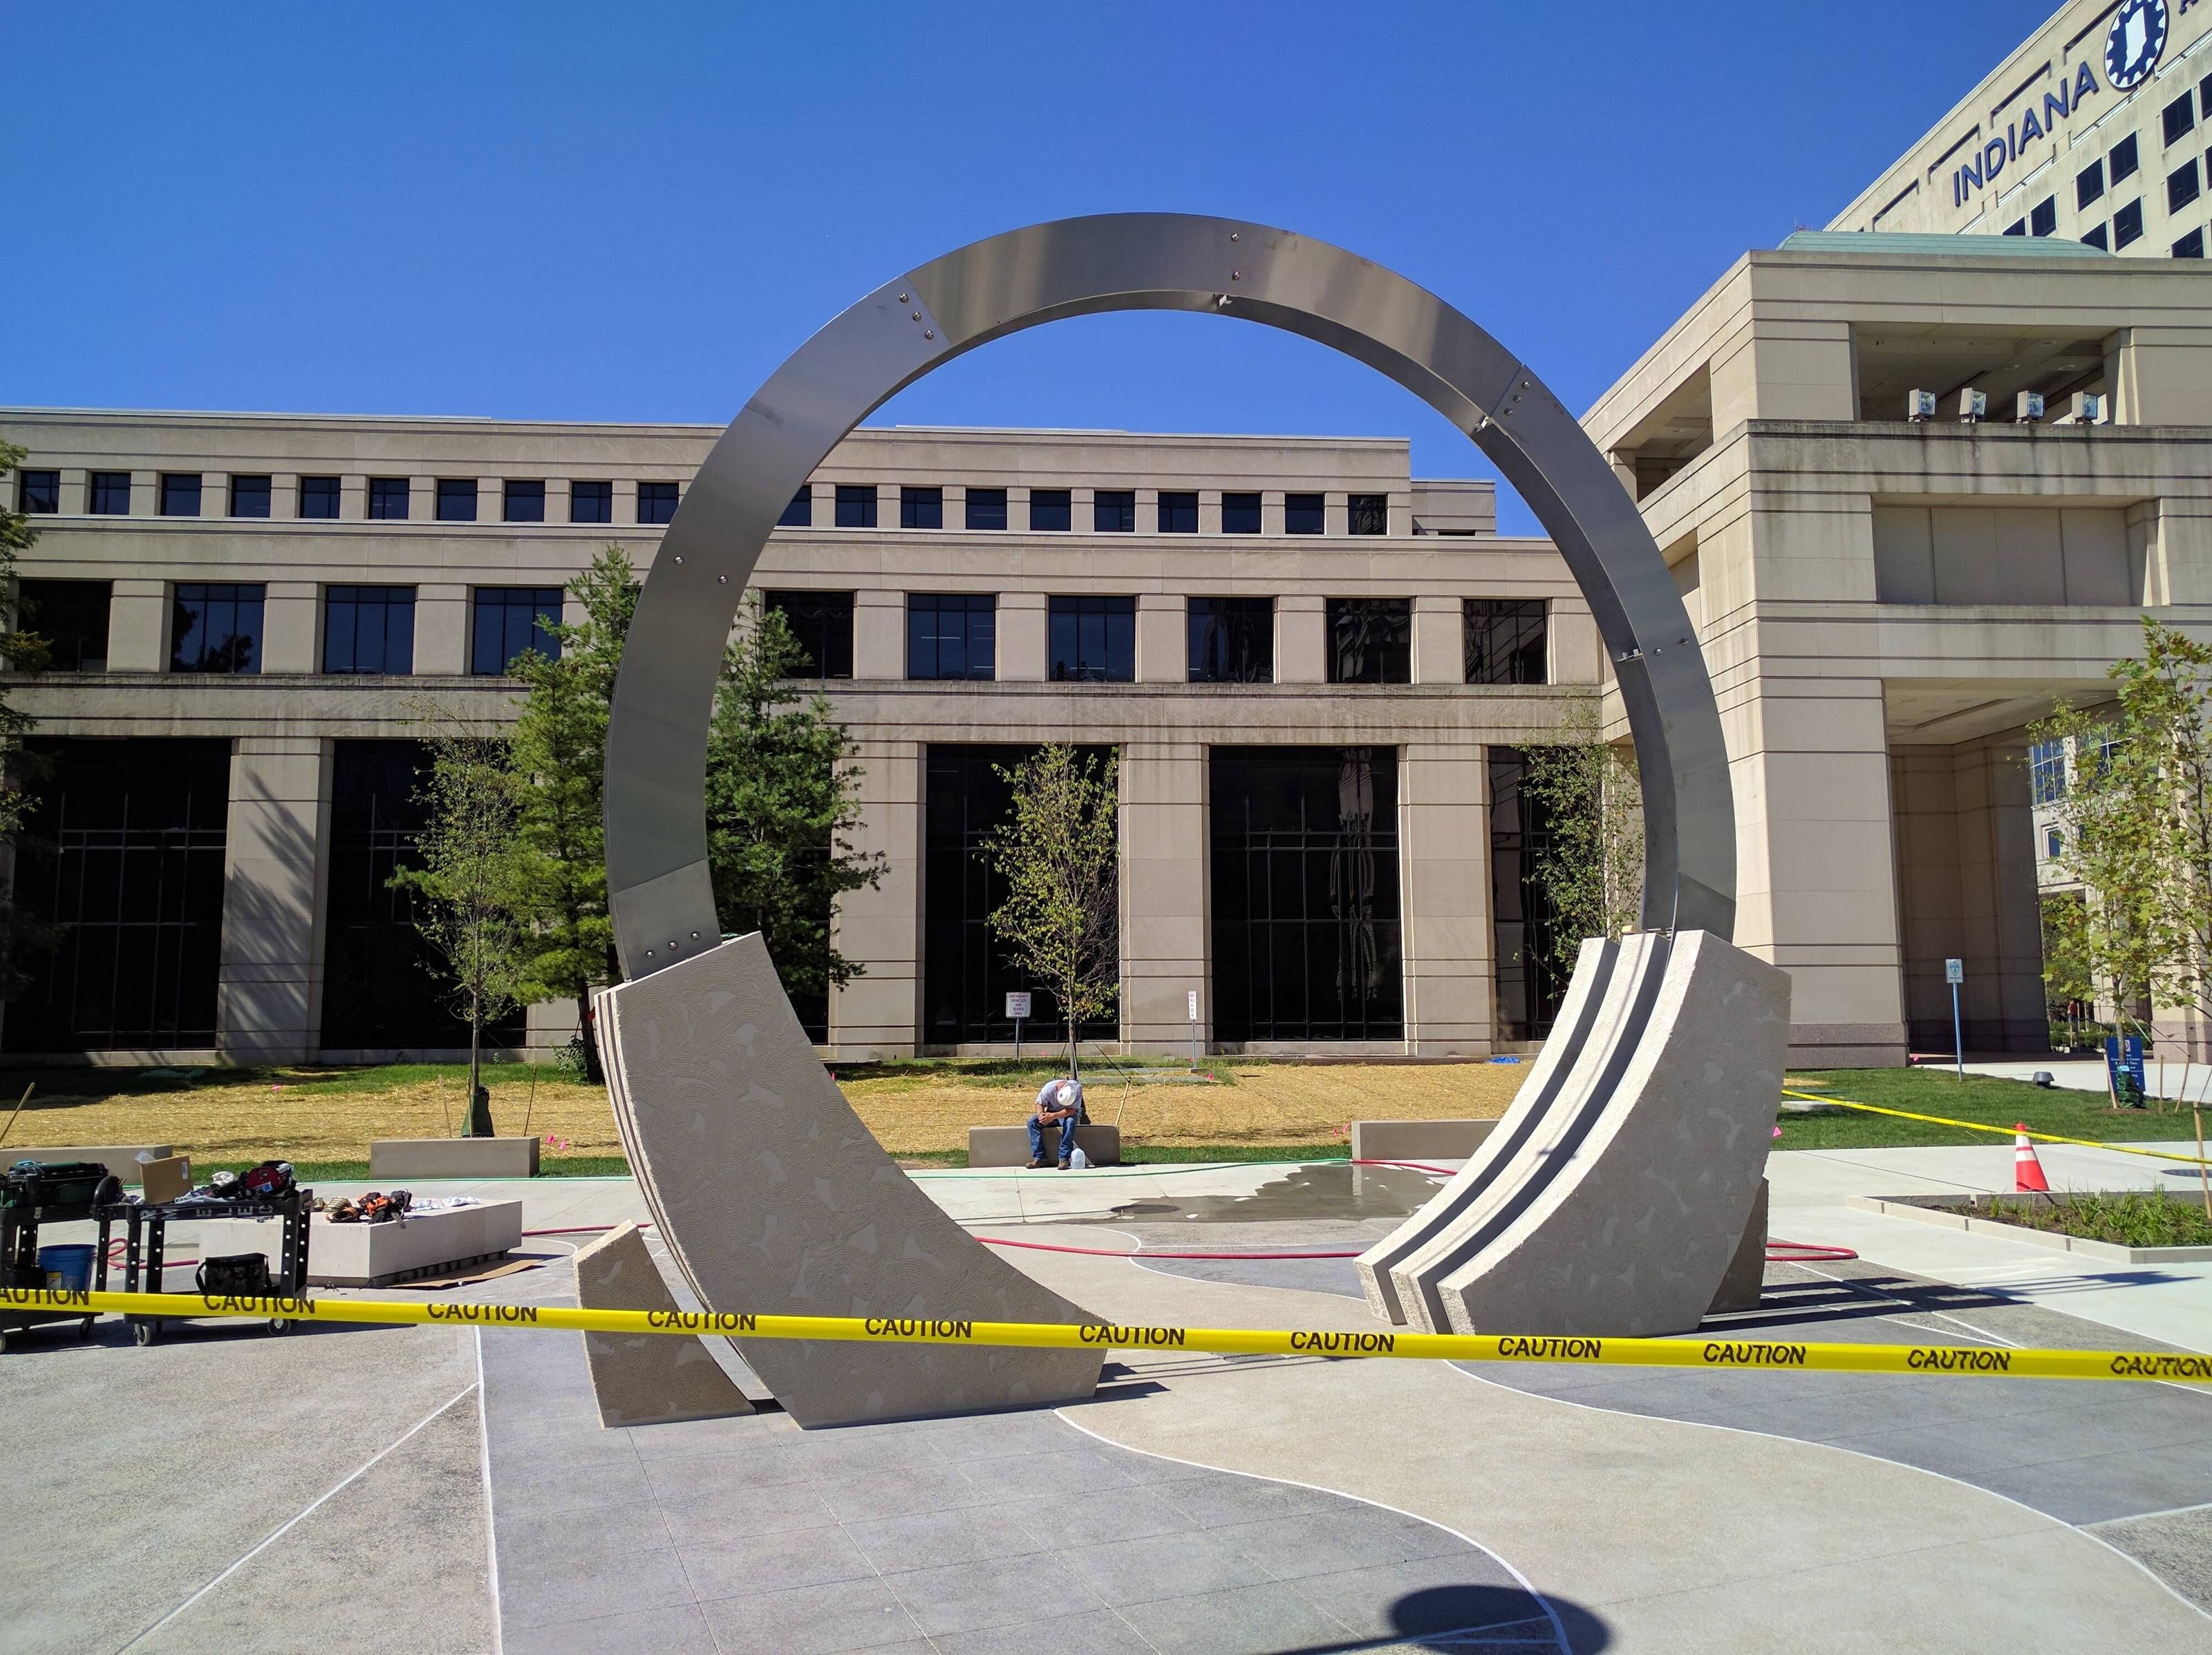 My commute's about to get a lot shorter. They're installing a Stargate outside of the building where i work.